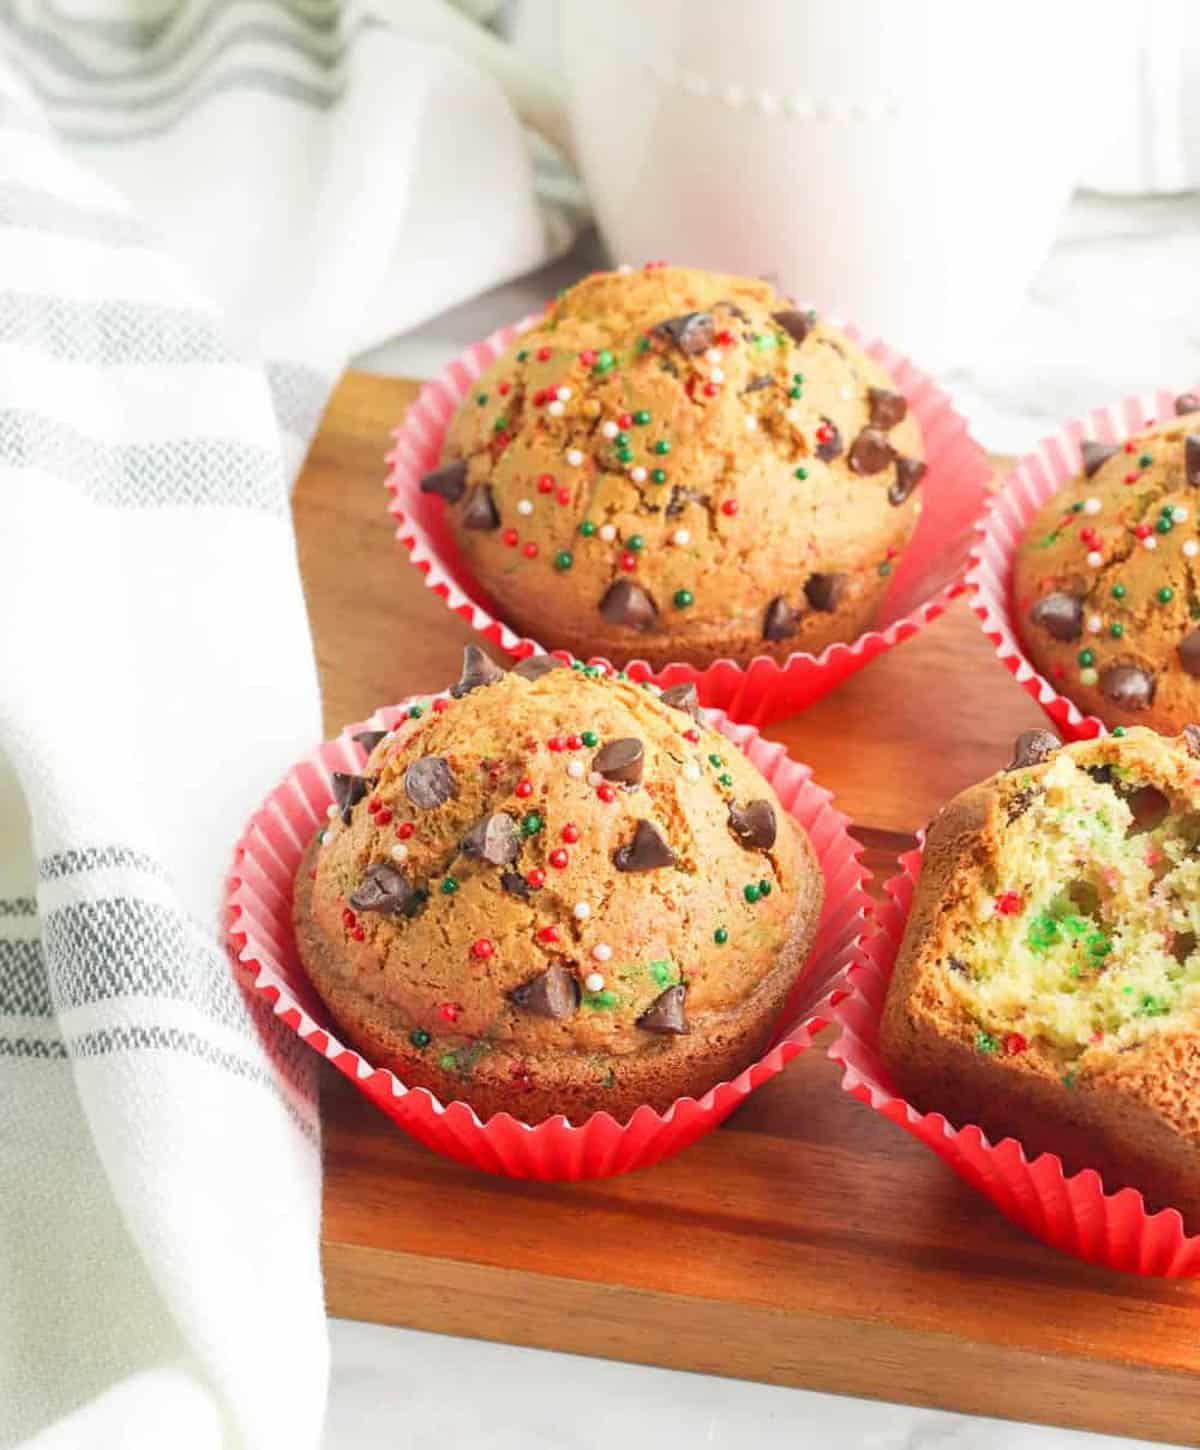 Chocolate chip Christmas muffins served on a wooden cutting board.